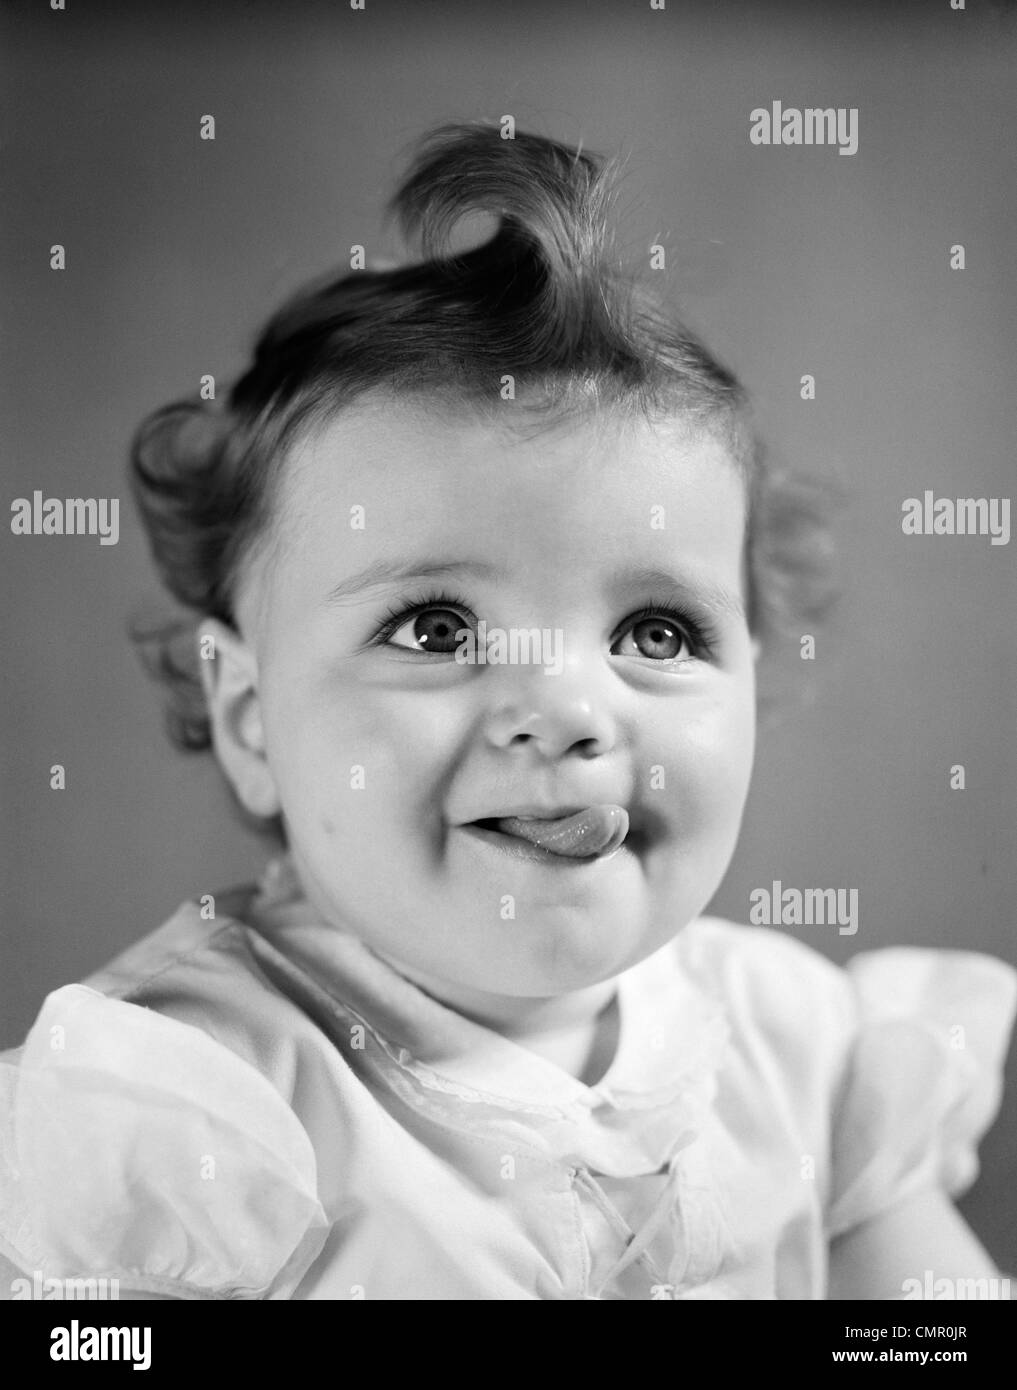 1940s BABY GIRL SMILING STICKING OUT HER TONGUE Stock Photo